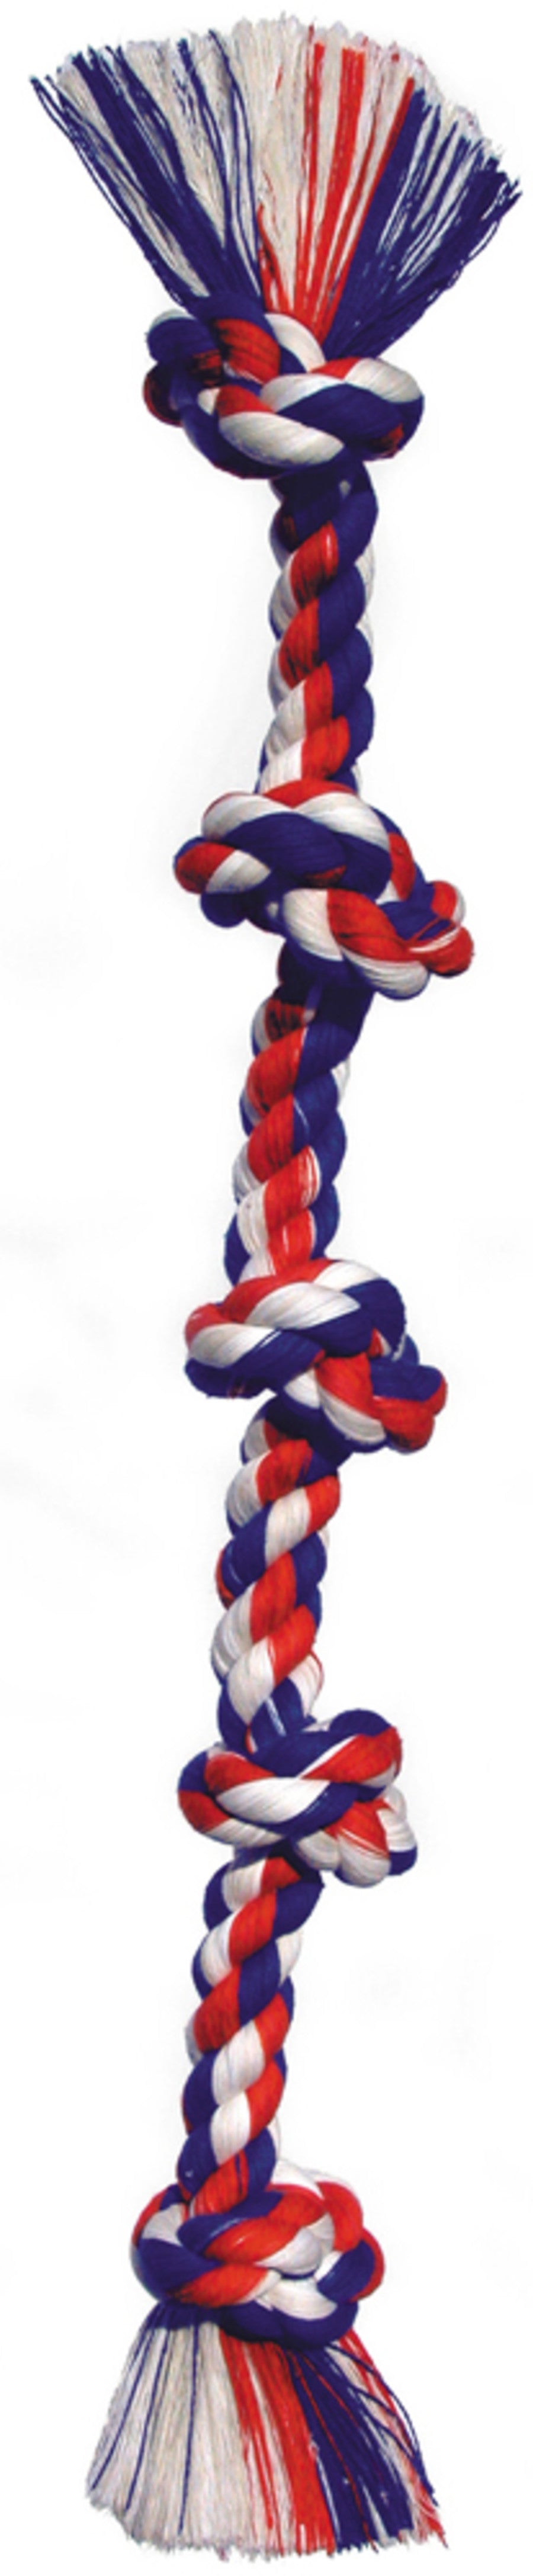 MAMMOTH ROPE 5 KNOT MULTI XLG